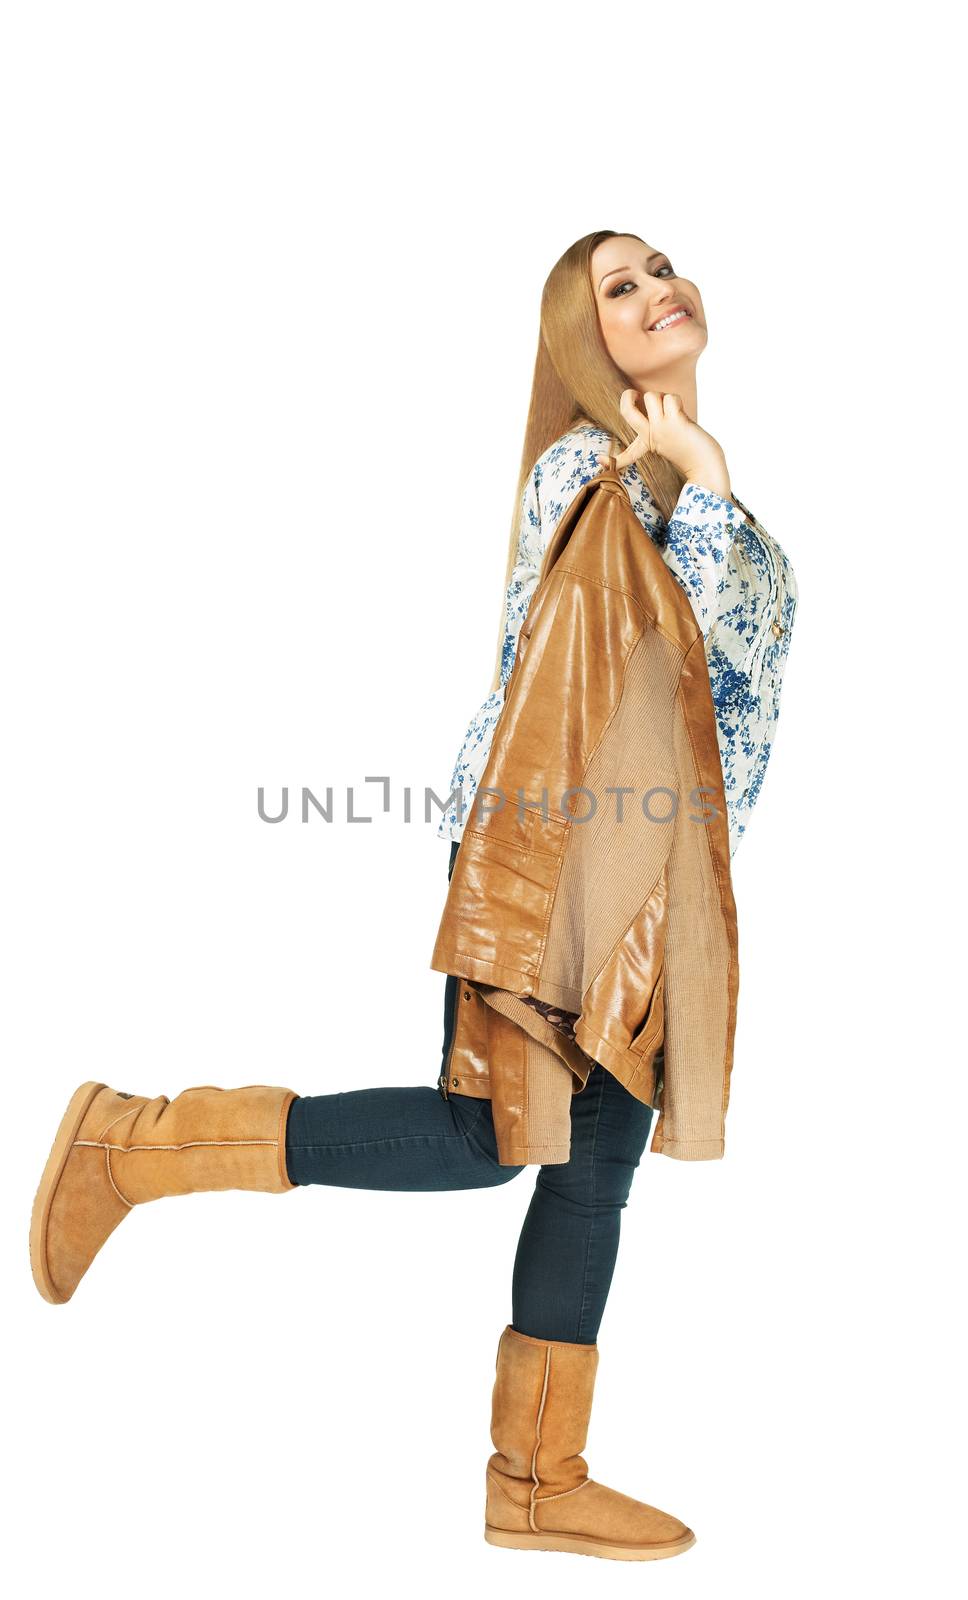 Charming xxl woman smiling and holding a jacket on white background